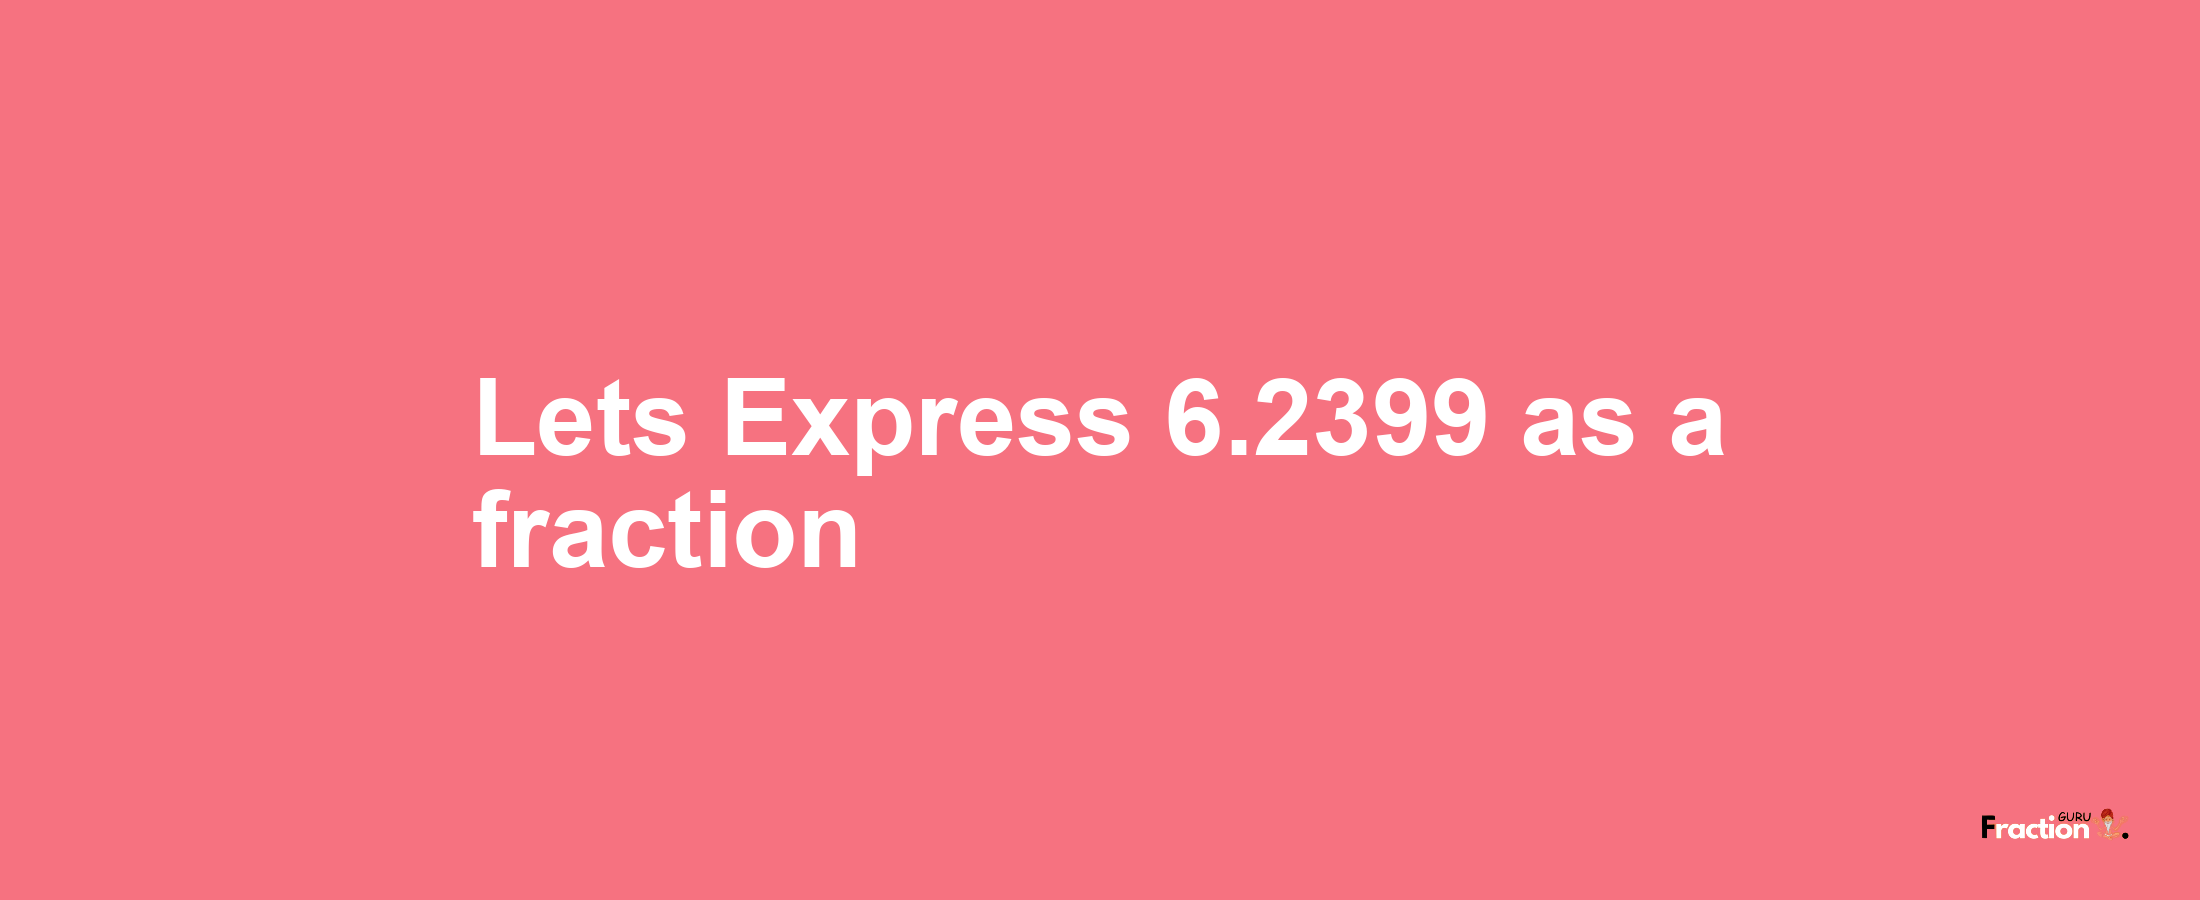 Lets Express 6.2399 as afraction